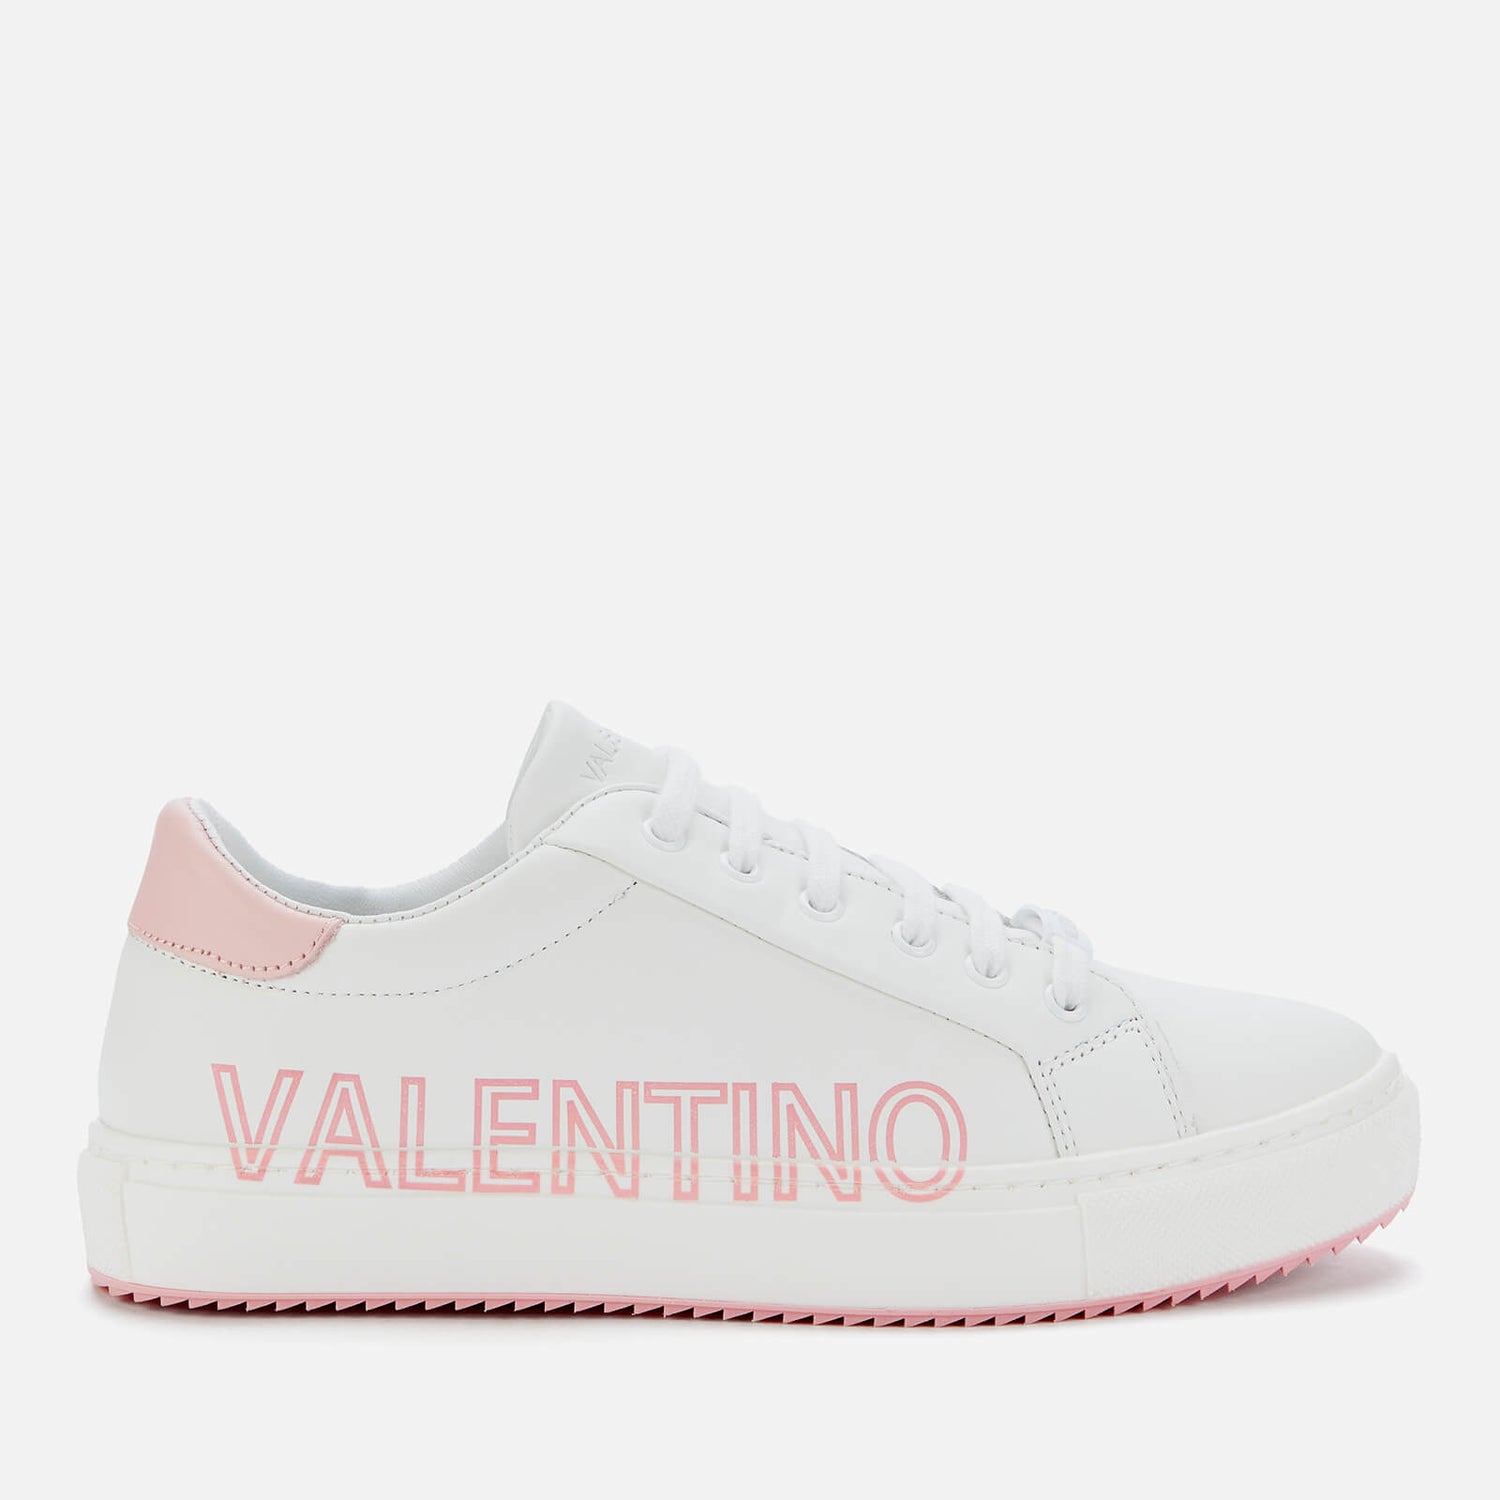 Valentino Women's Leather Low Top Trainers - White/Pink